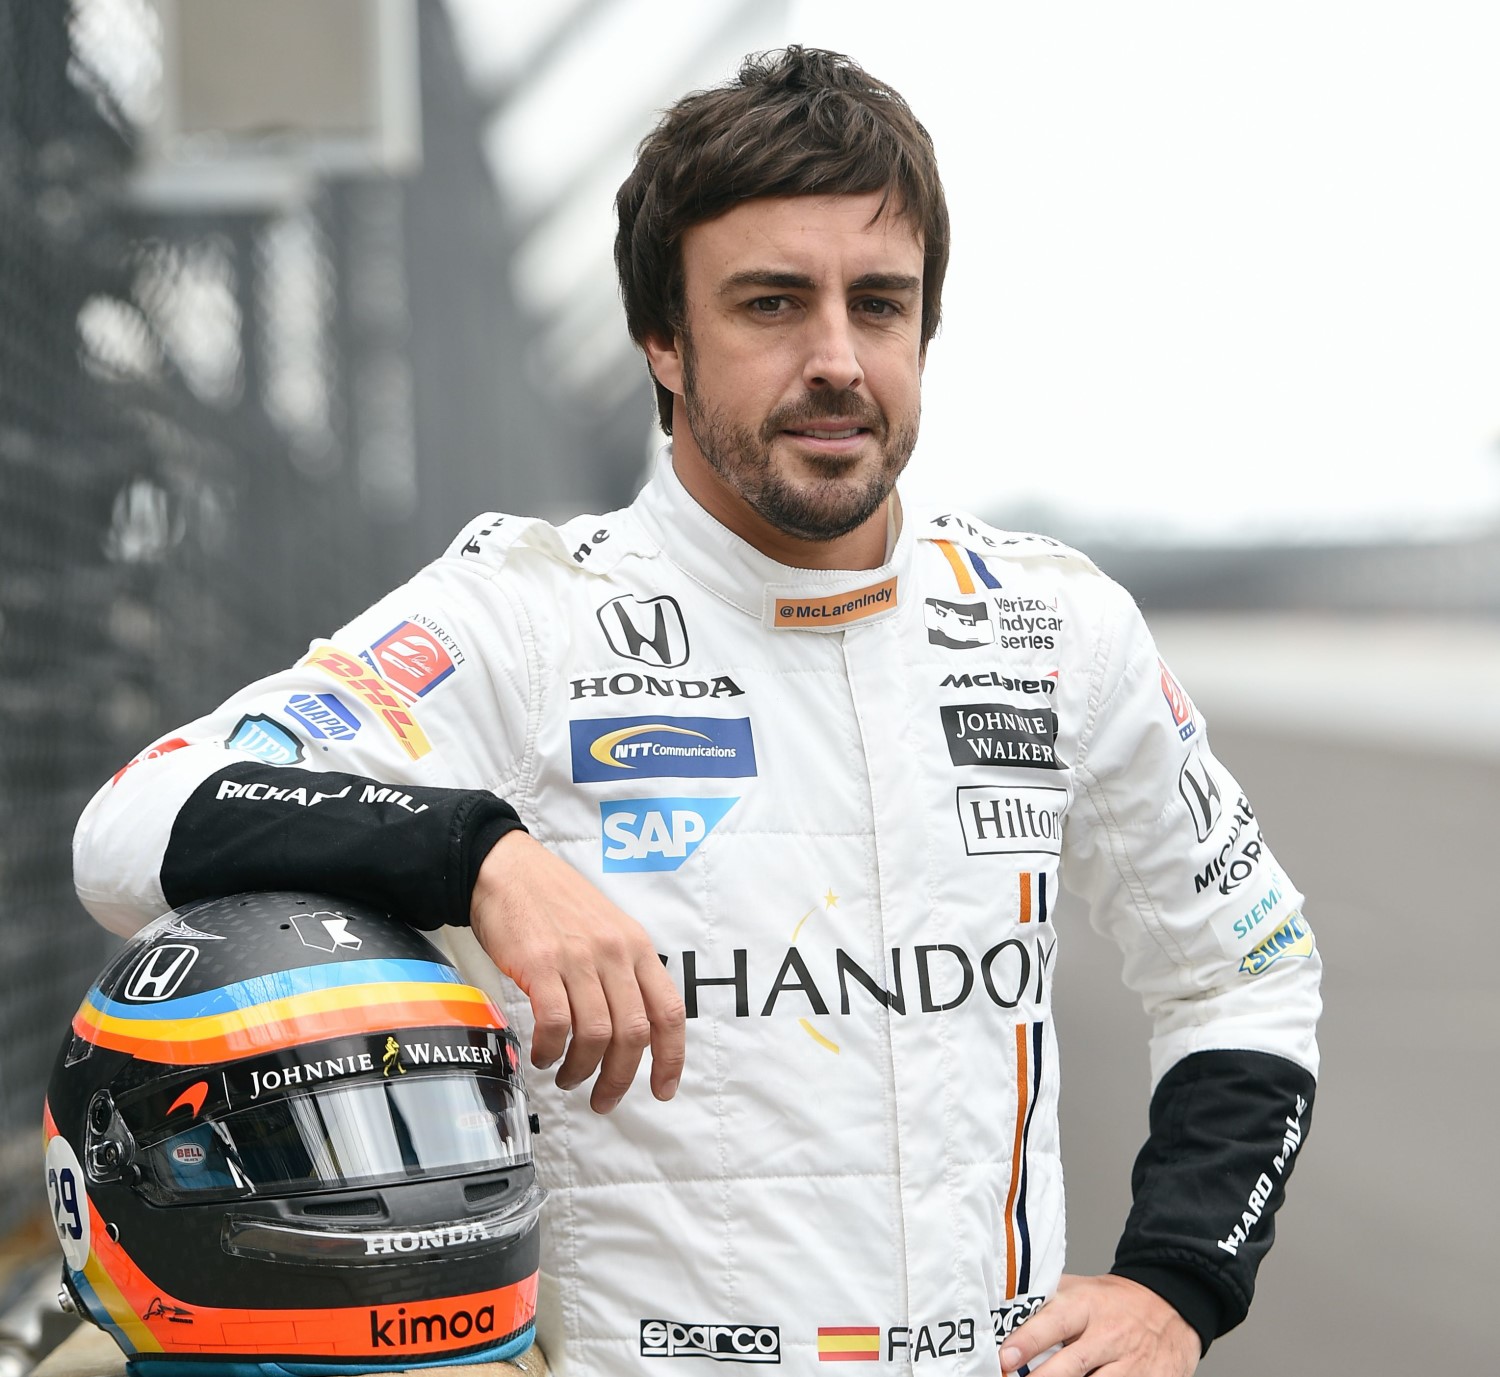 Alonso is now gone and IndyCar has returned to its small domestic stage